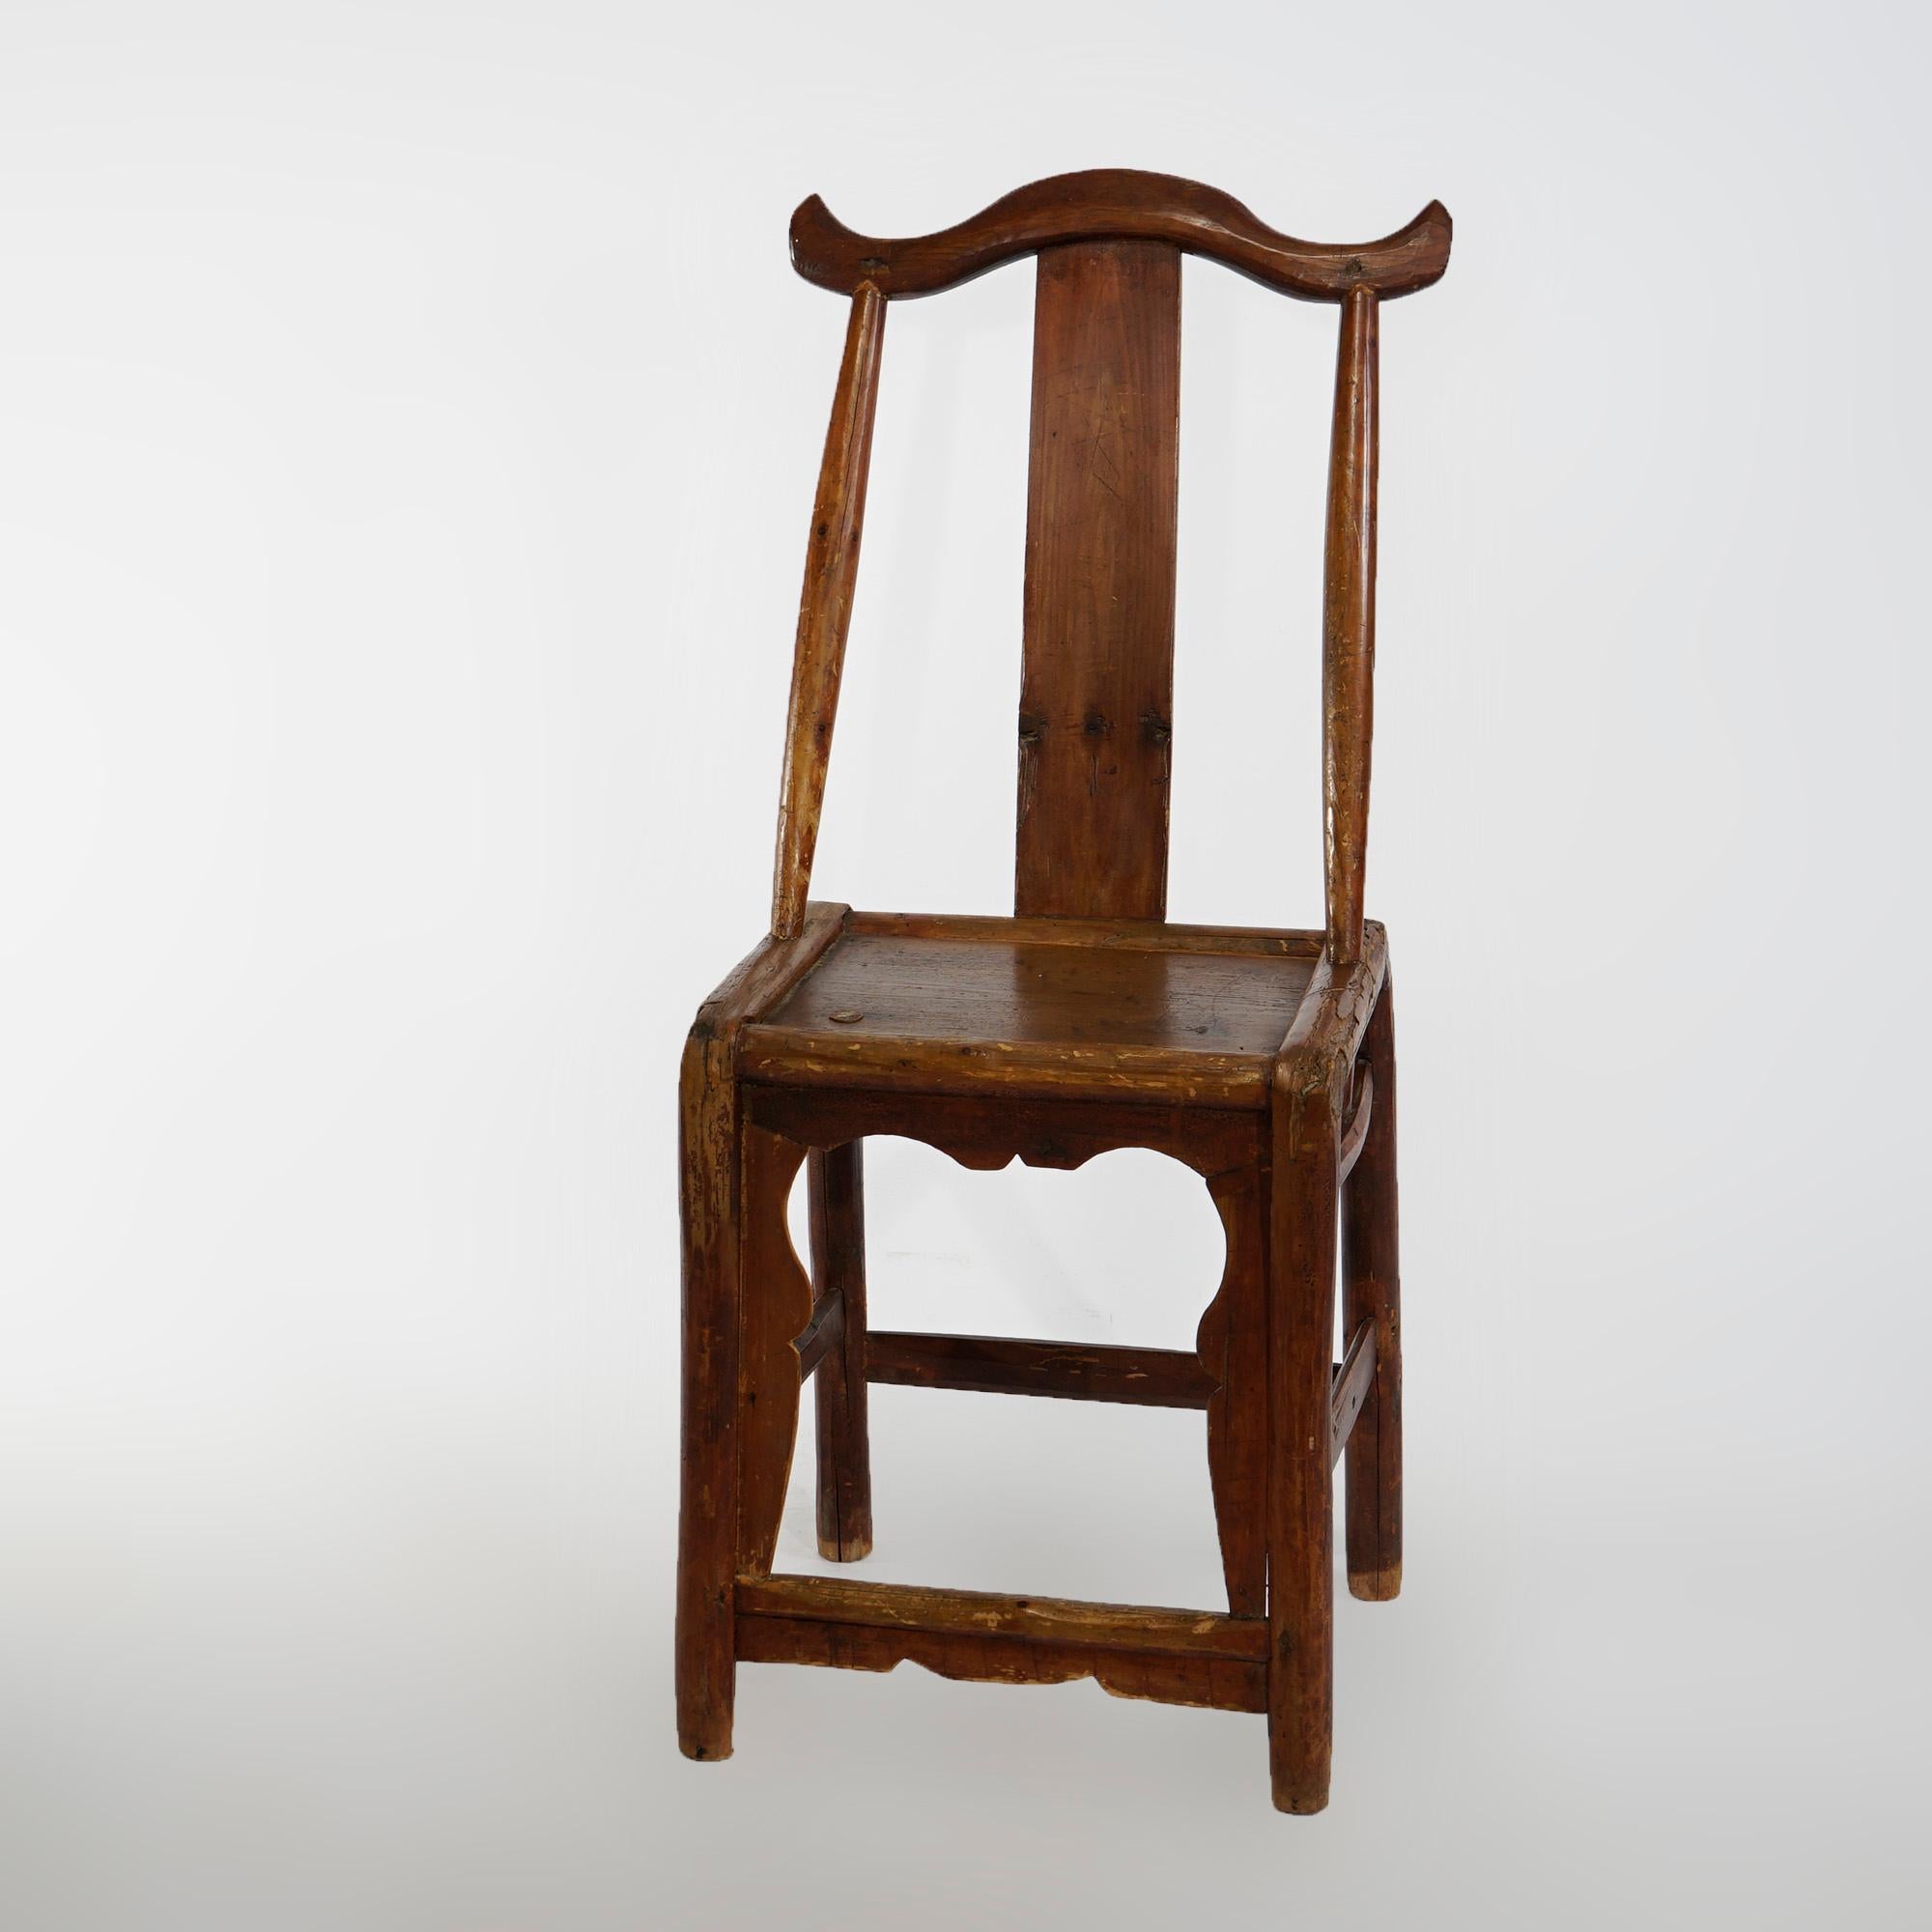 A set of six Chinese hand crafted dining chairs offer carved and pegged hardwood construction with splat backs having shaped rails and two with chop mark characters as photographed, 20th century

Measures - 41.25''H x 18.25''W x 18.5''D; 20.5'' seat